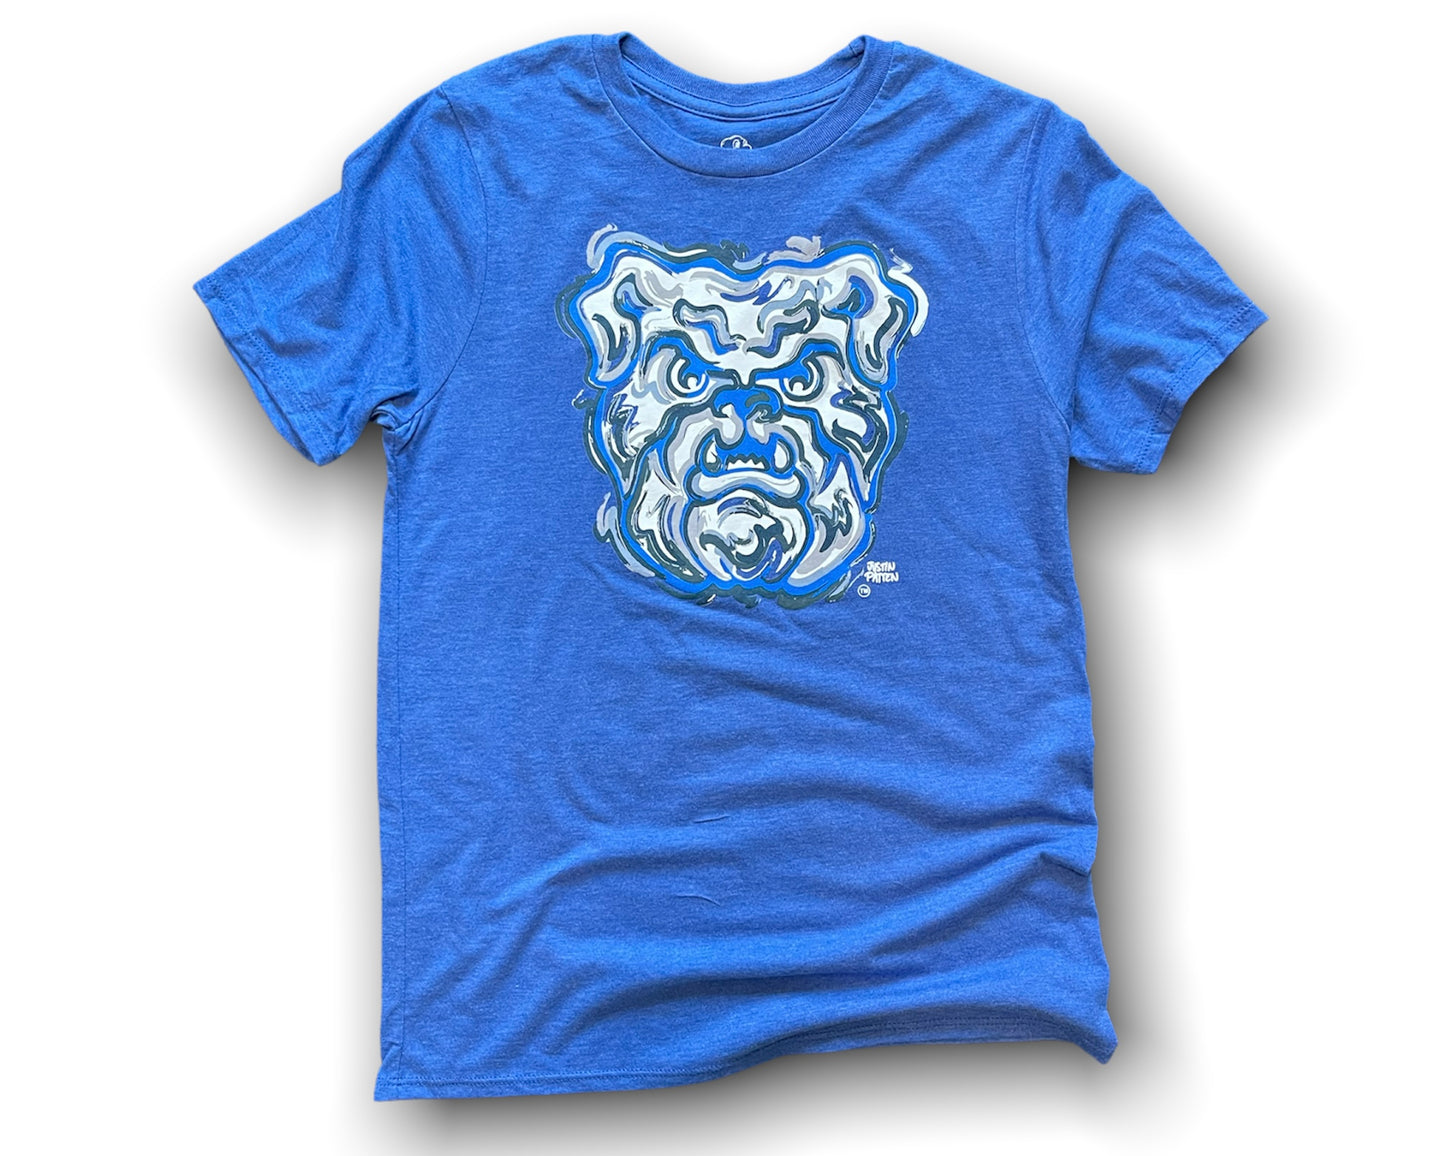 Butler University Bulldog Youth Tee by Justin Patten (2 Colors)